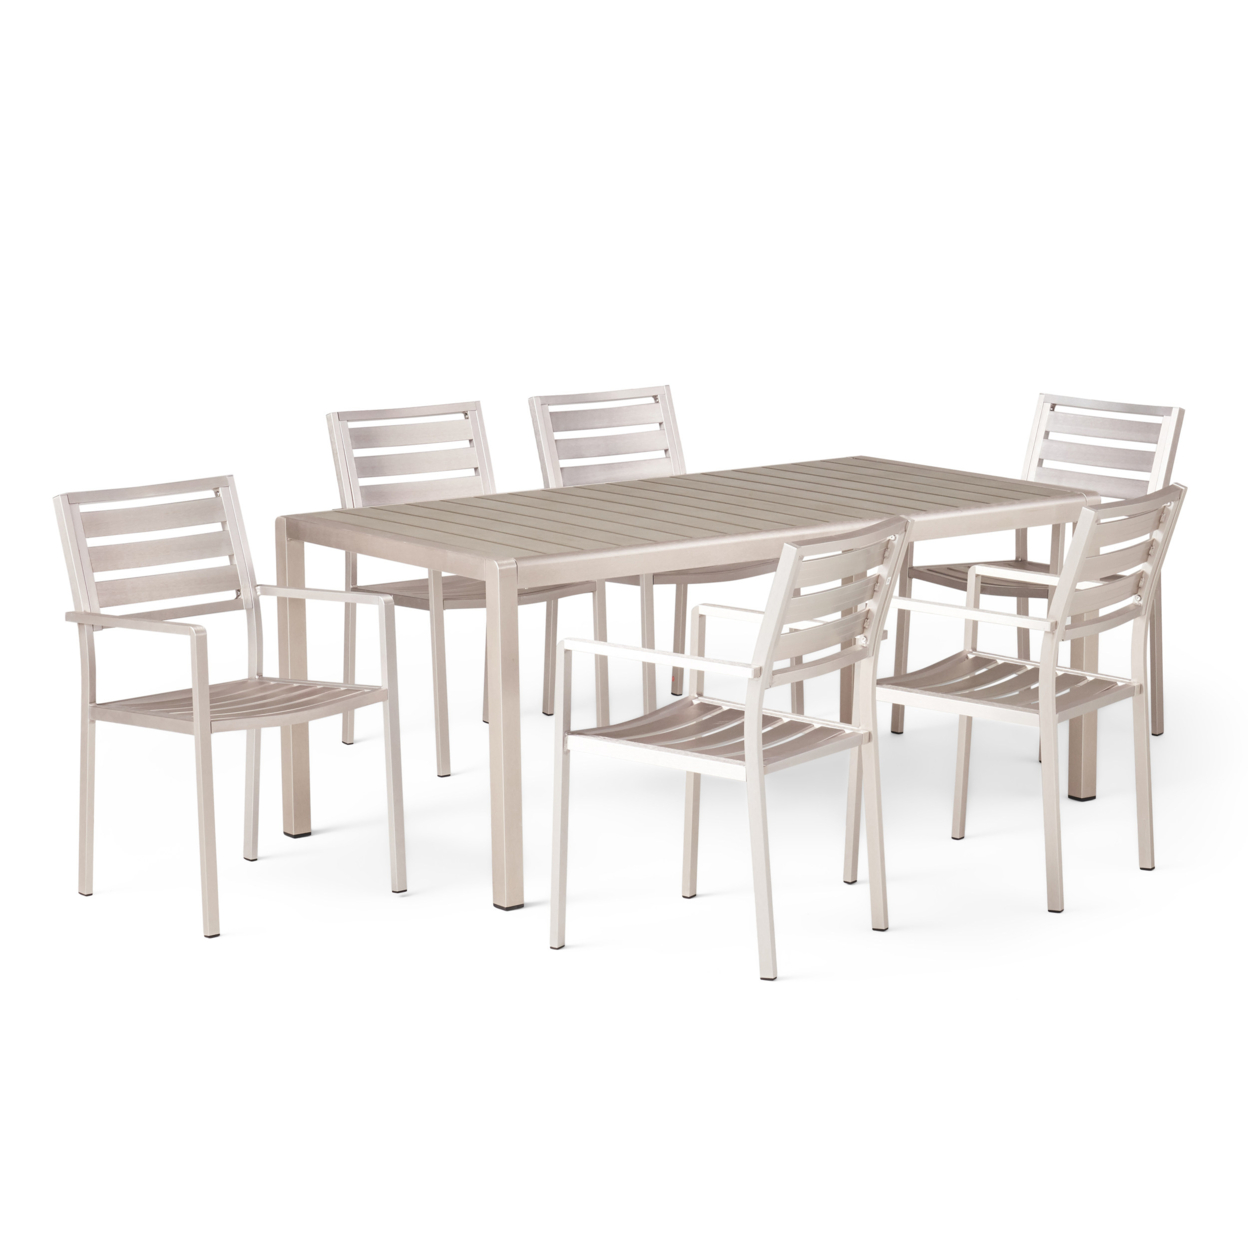 Cherie Outdoor Modern 6 Seater Aluminum Dining Set With Faux Wood Table Top